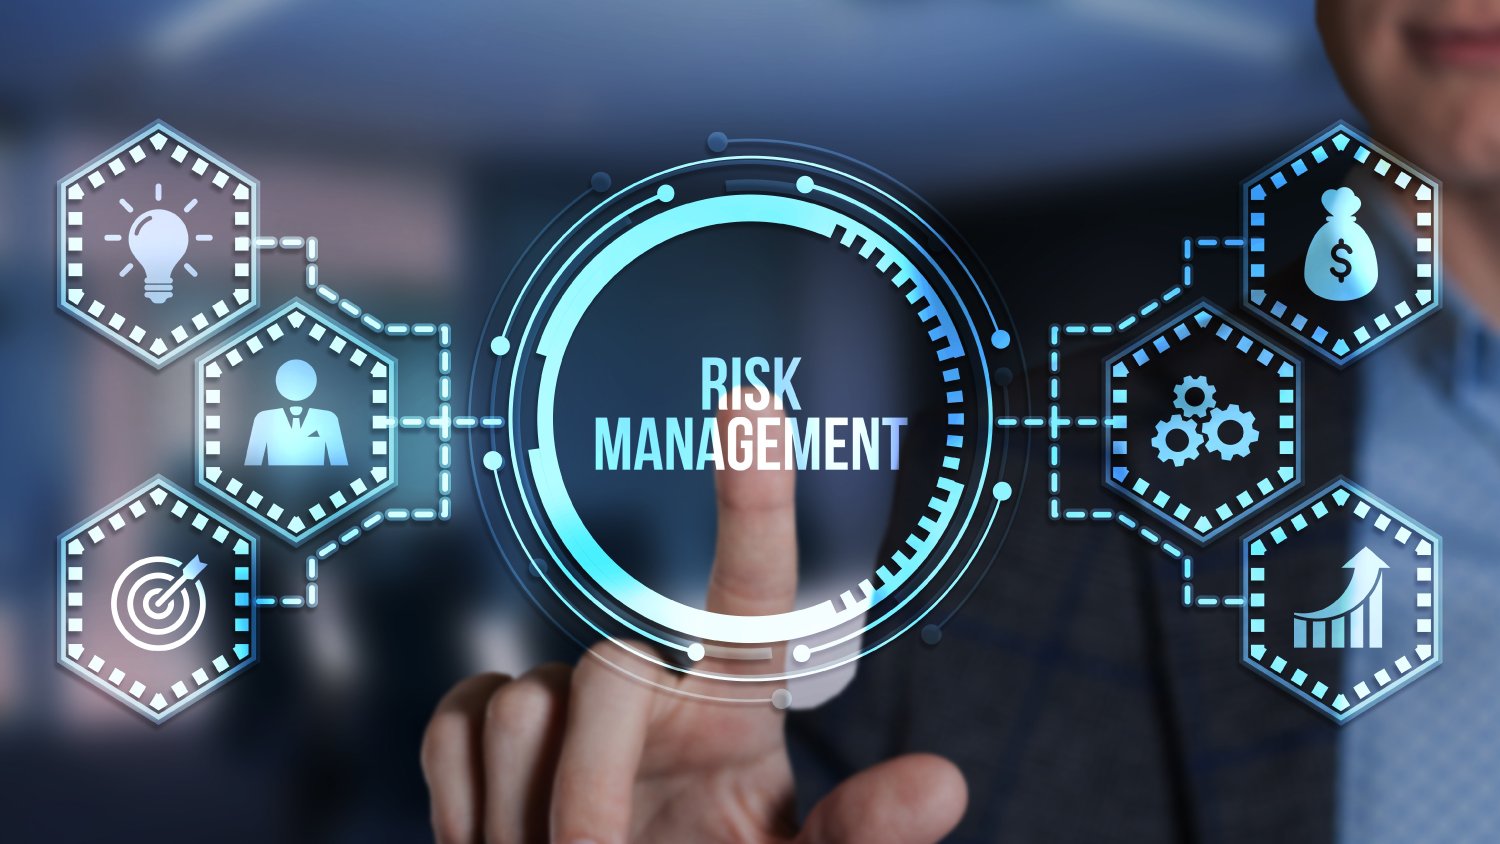 Cybersecurity Risk Management